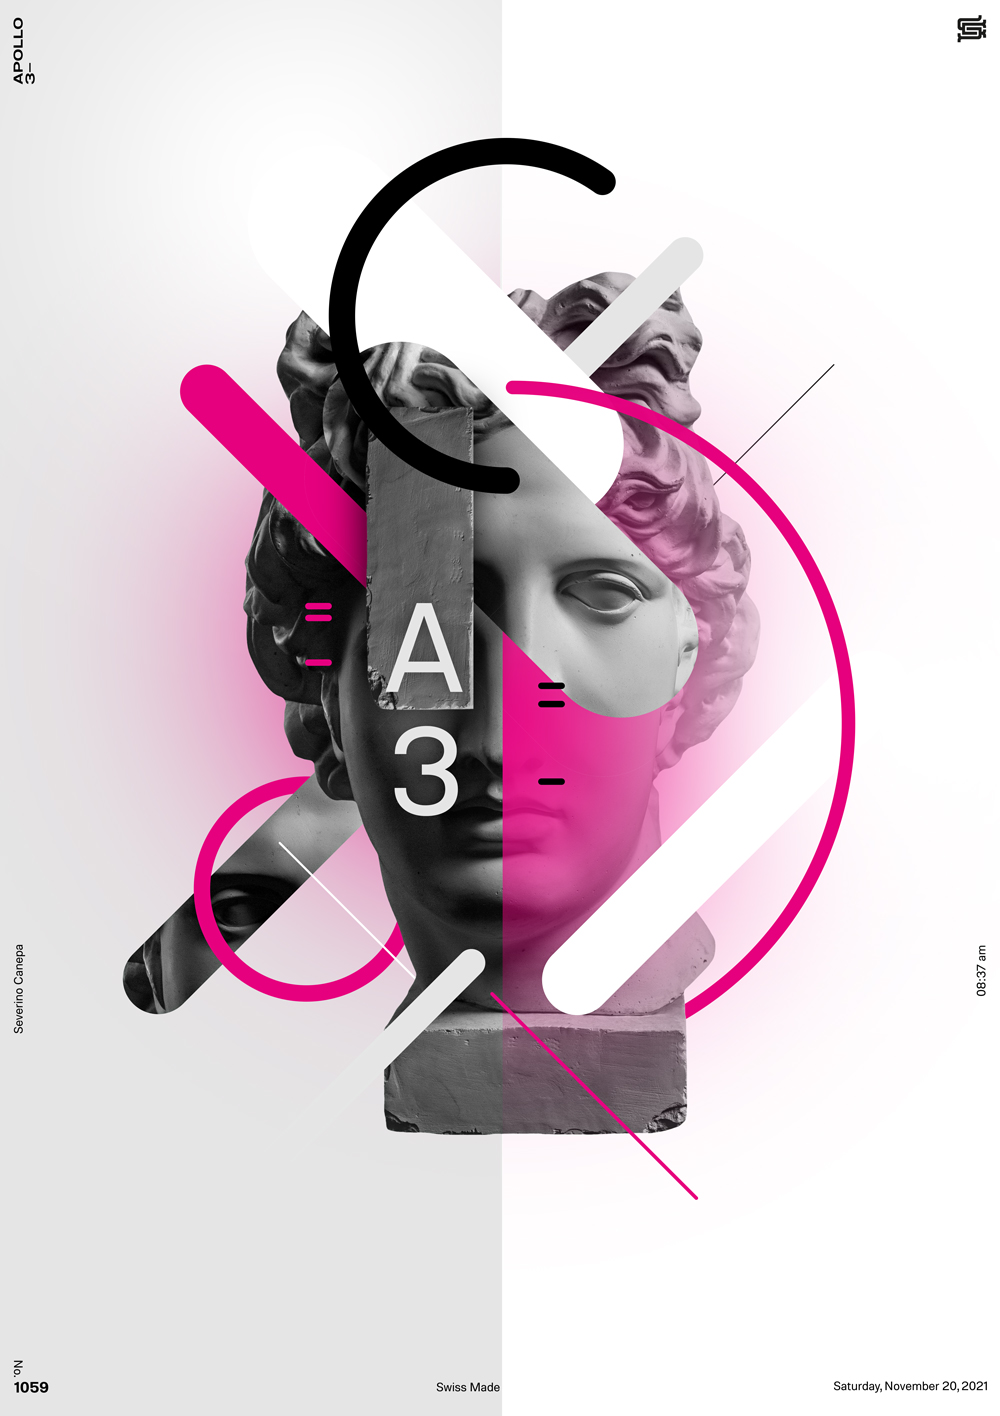 Impressive and playful digital creation made with Apollo